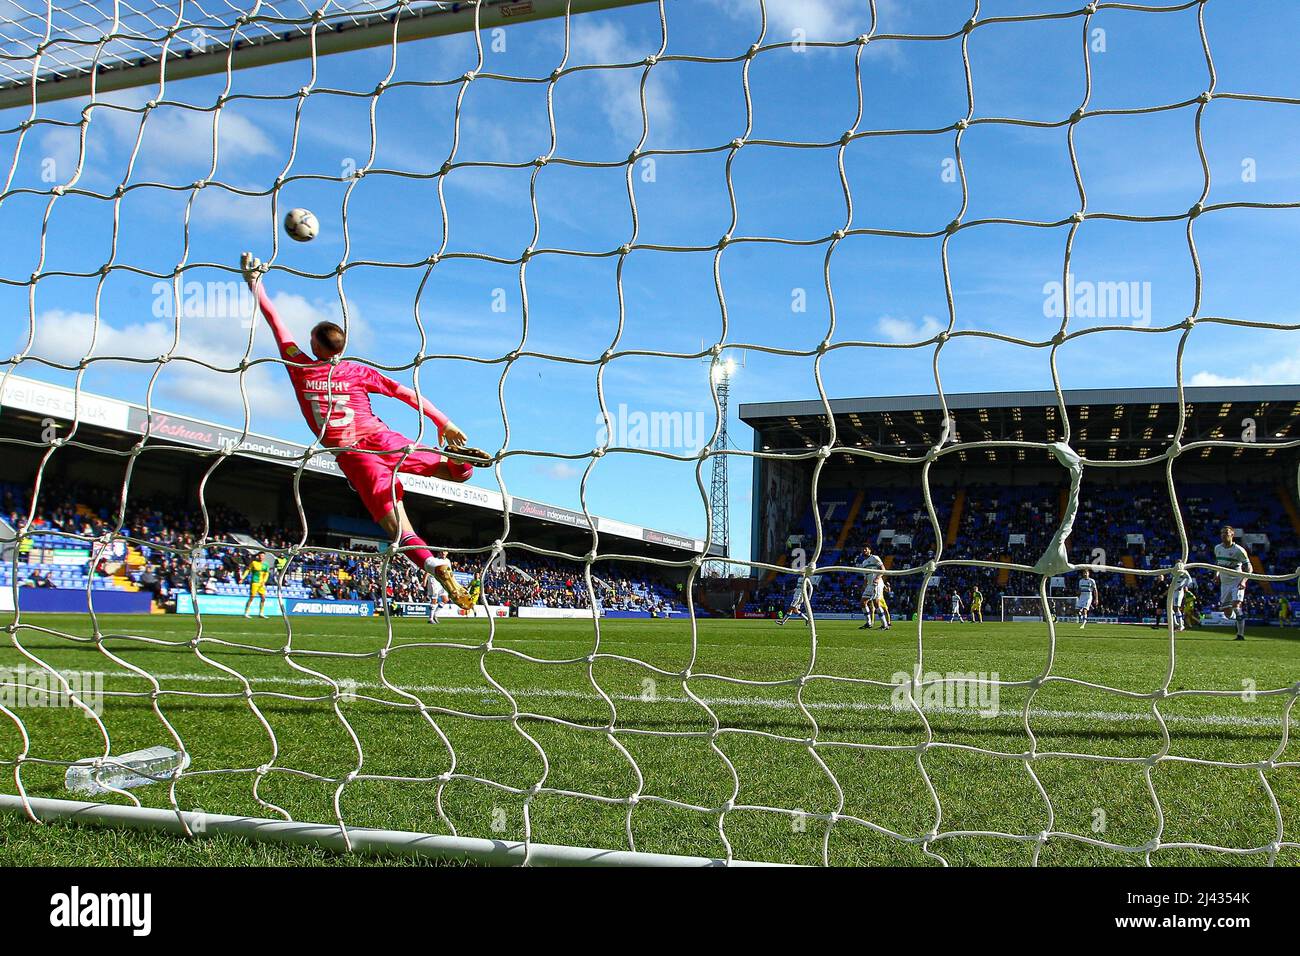 Joe Murphy Goalkeeper of Tranmere has the ball covered as it goes over the bar - during the game Tranmere v Bristol Rovers Stock Photo